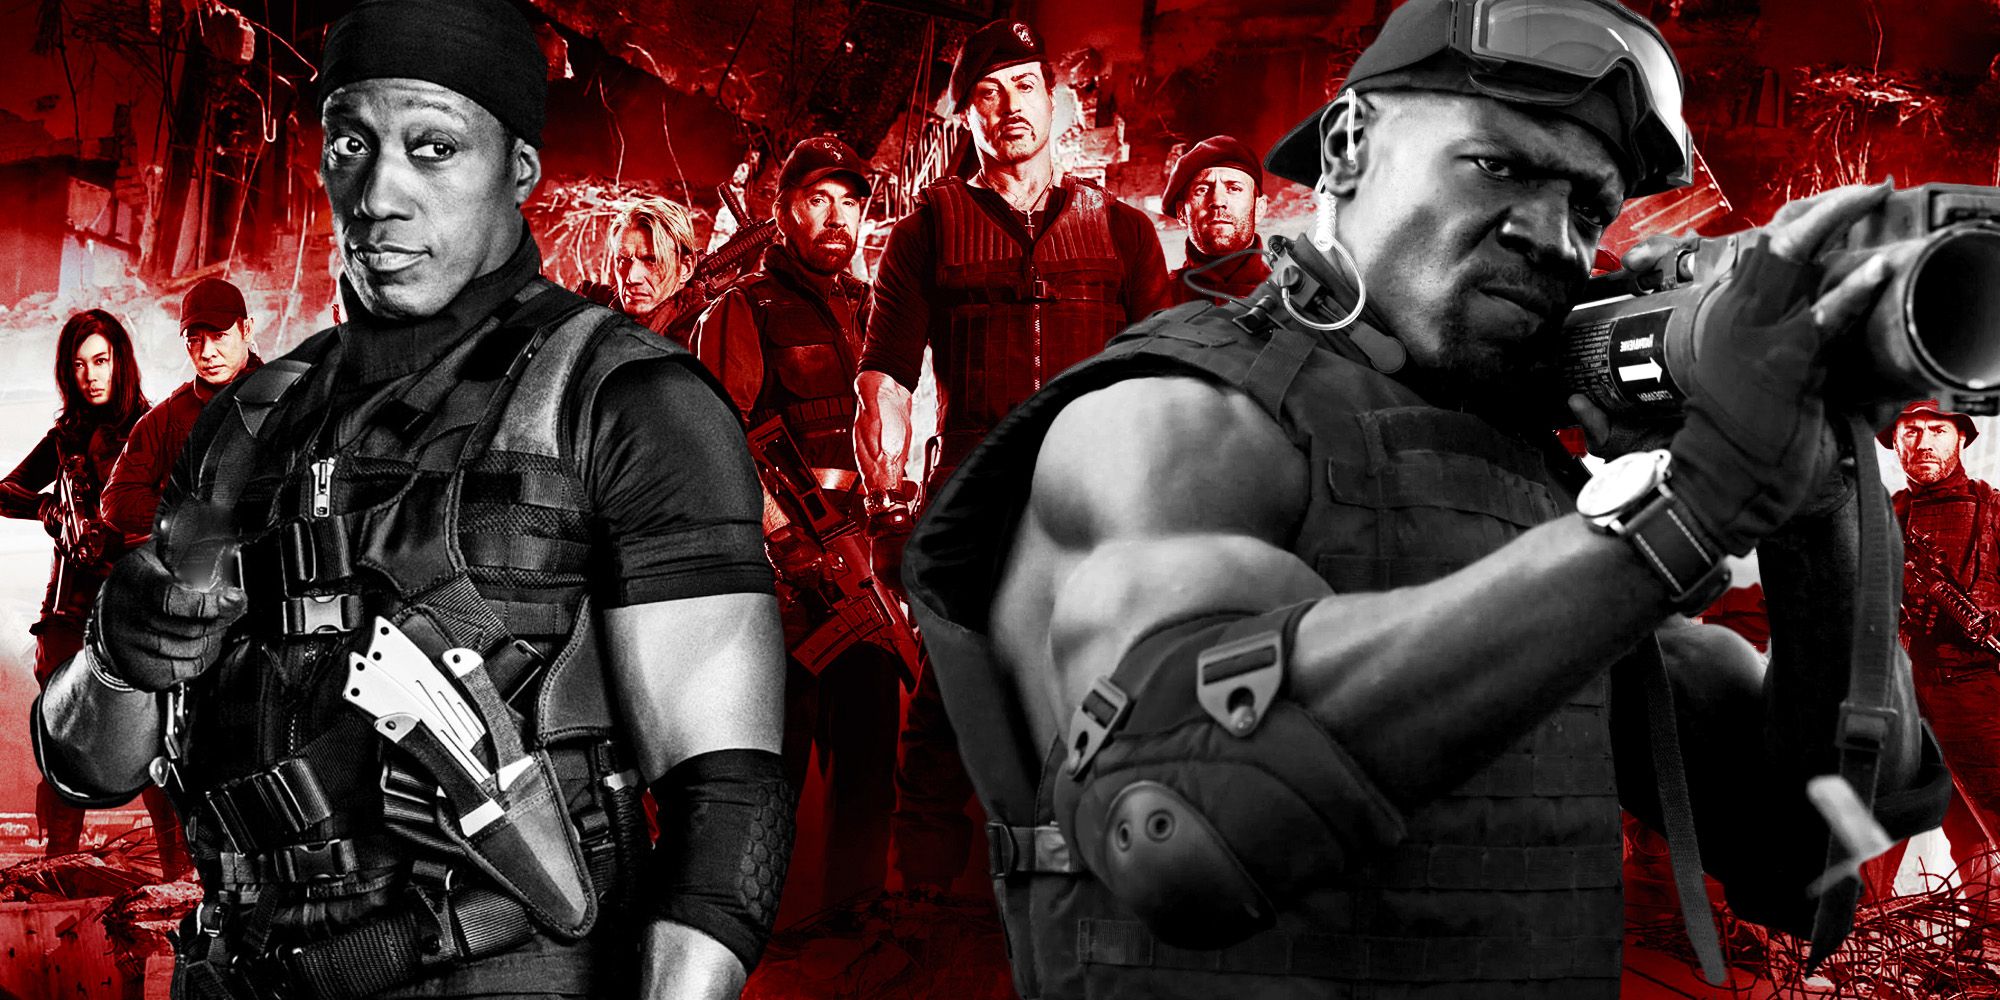 strongest Expendables movie lineup